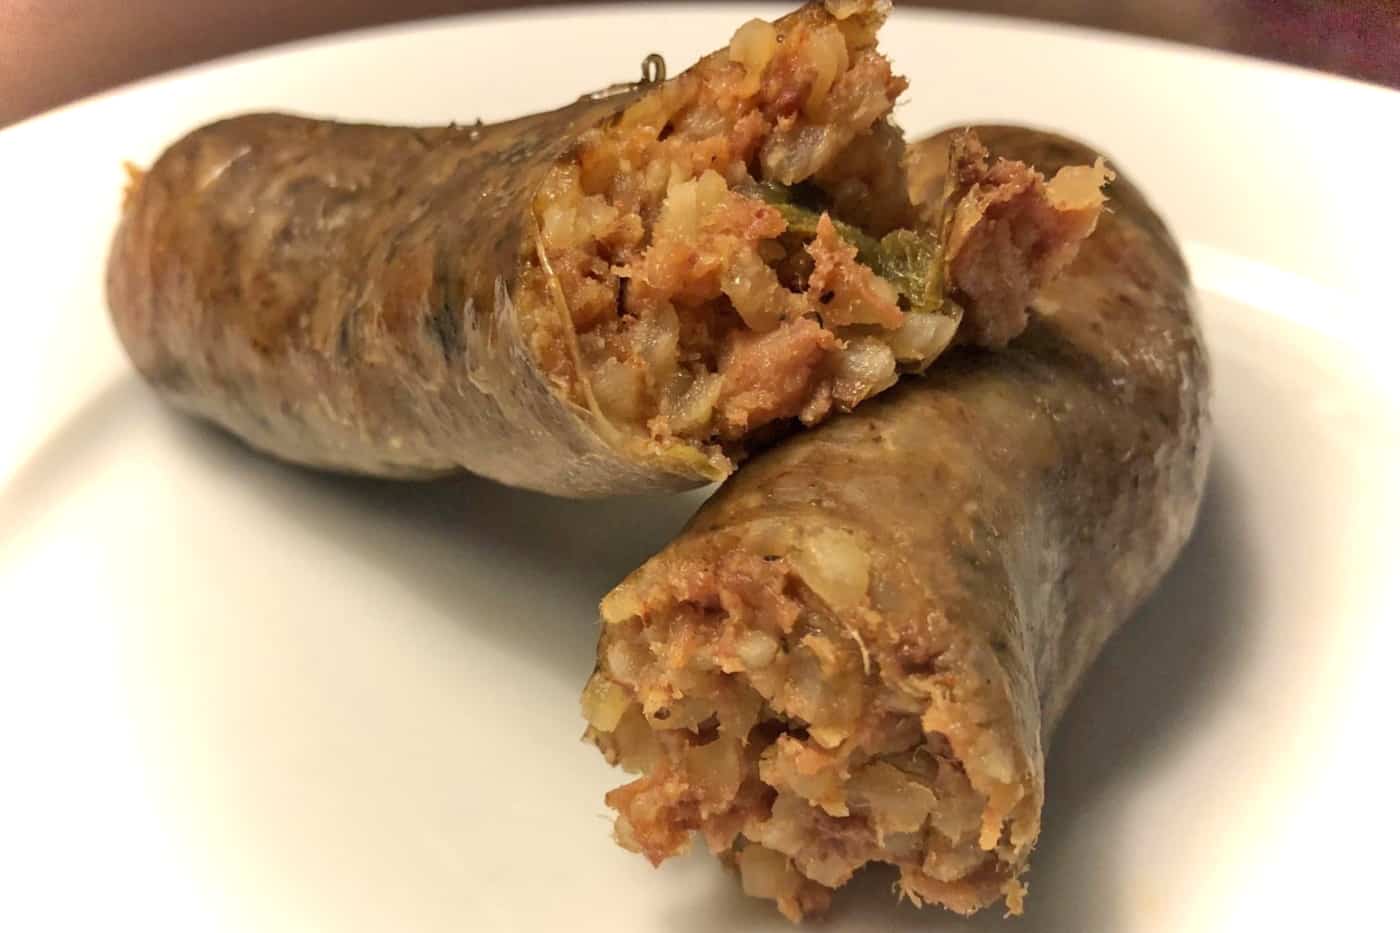 Rugged mix of meat, rice, and spice inside a smoked boudin link